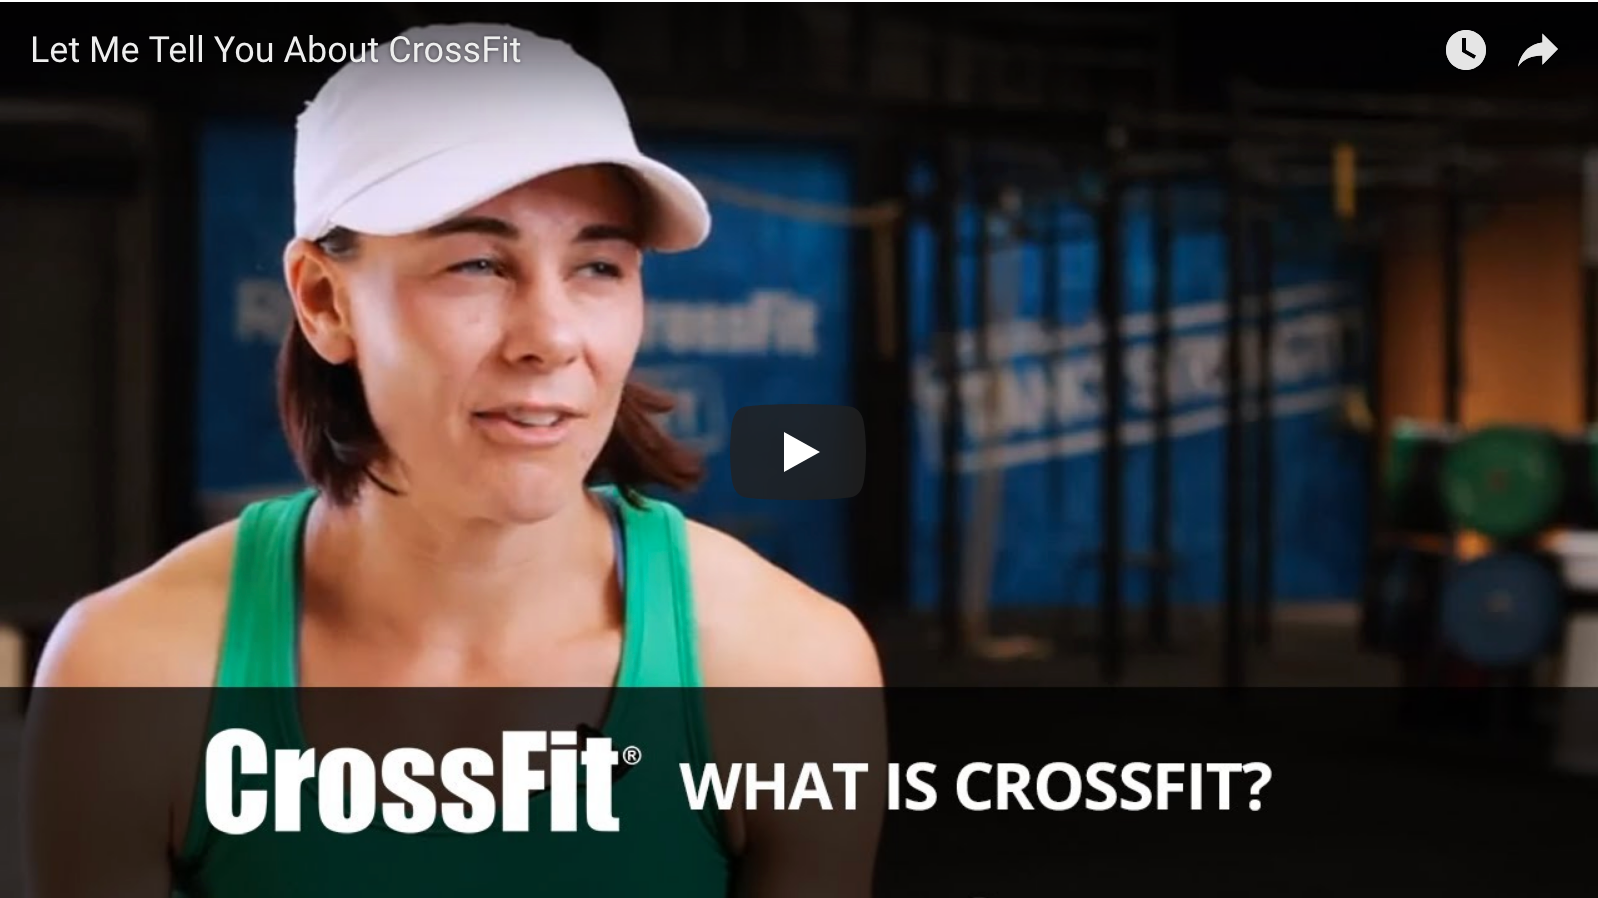 What is Crossfit?